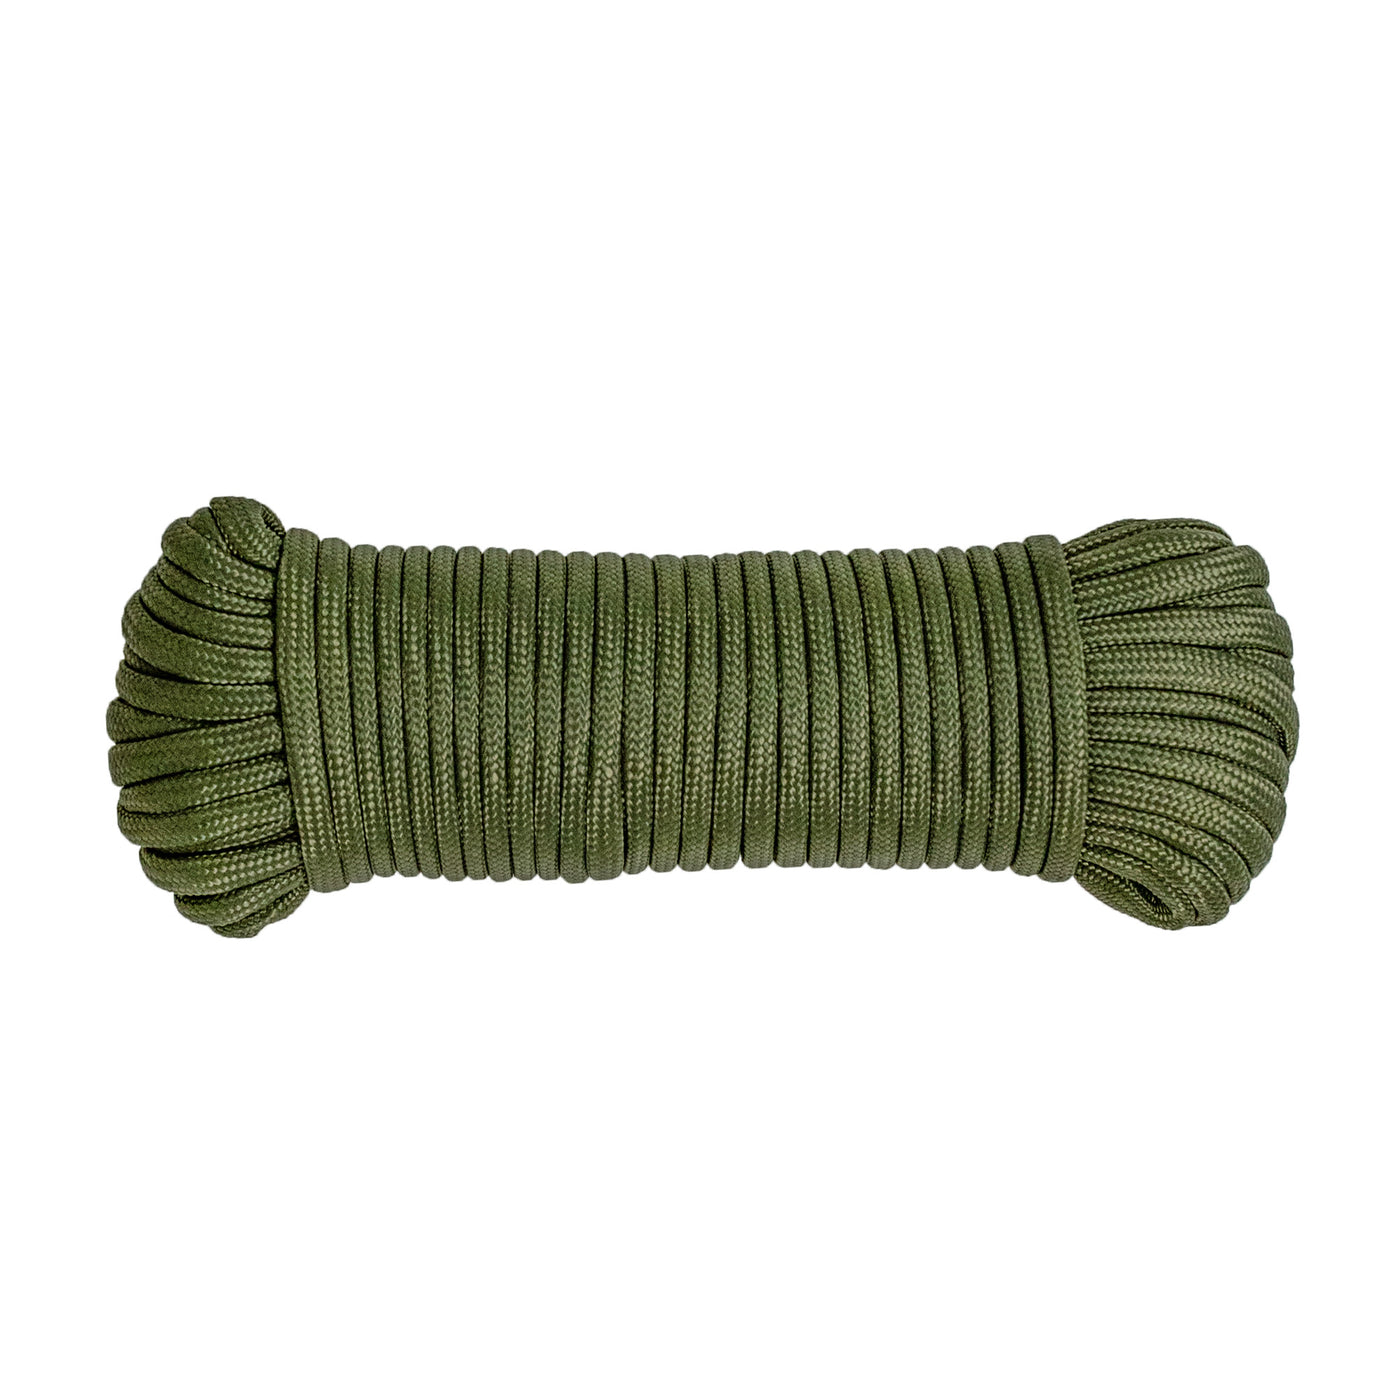 Mossy Oak Paracord Olive Drab 50 Foot